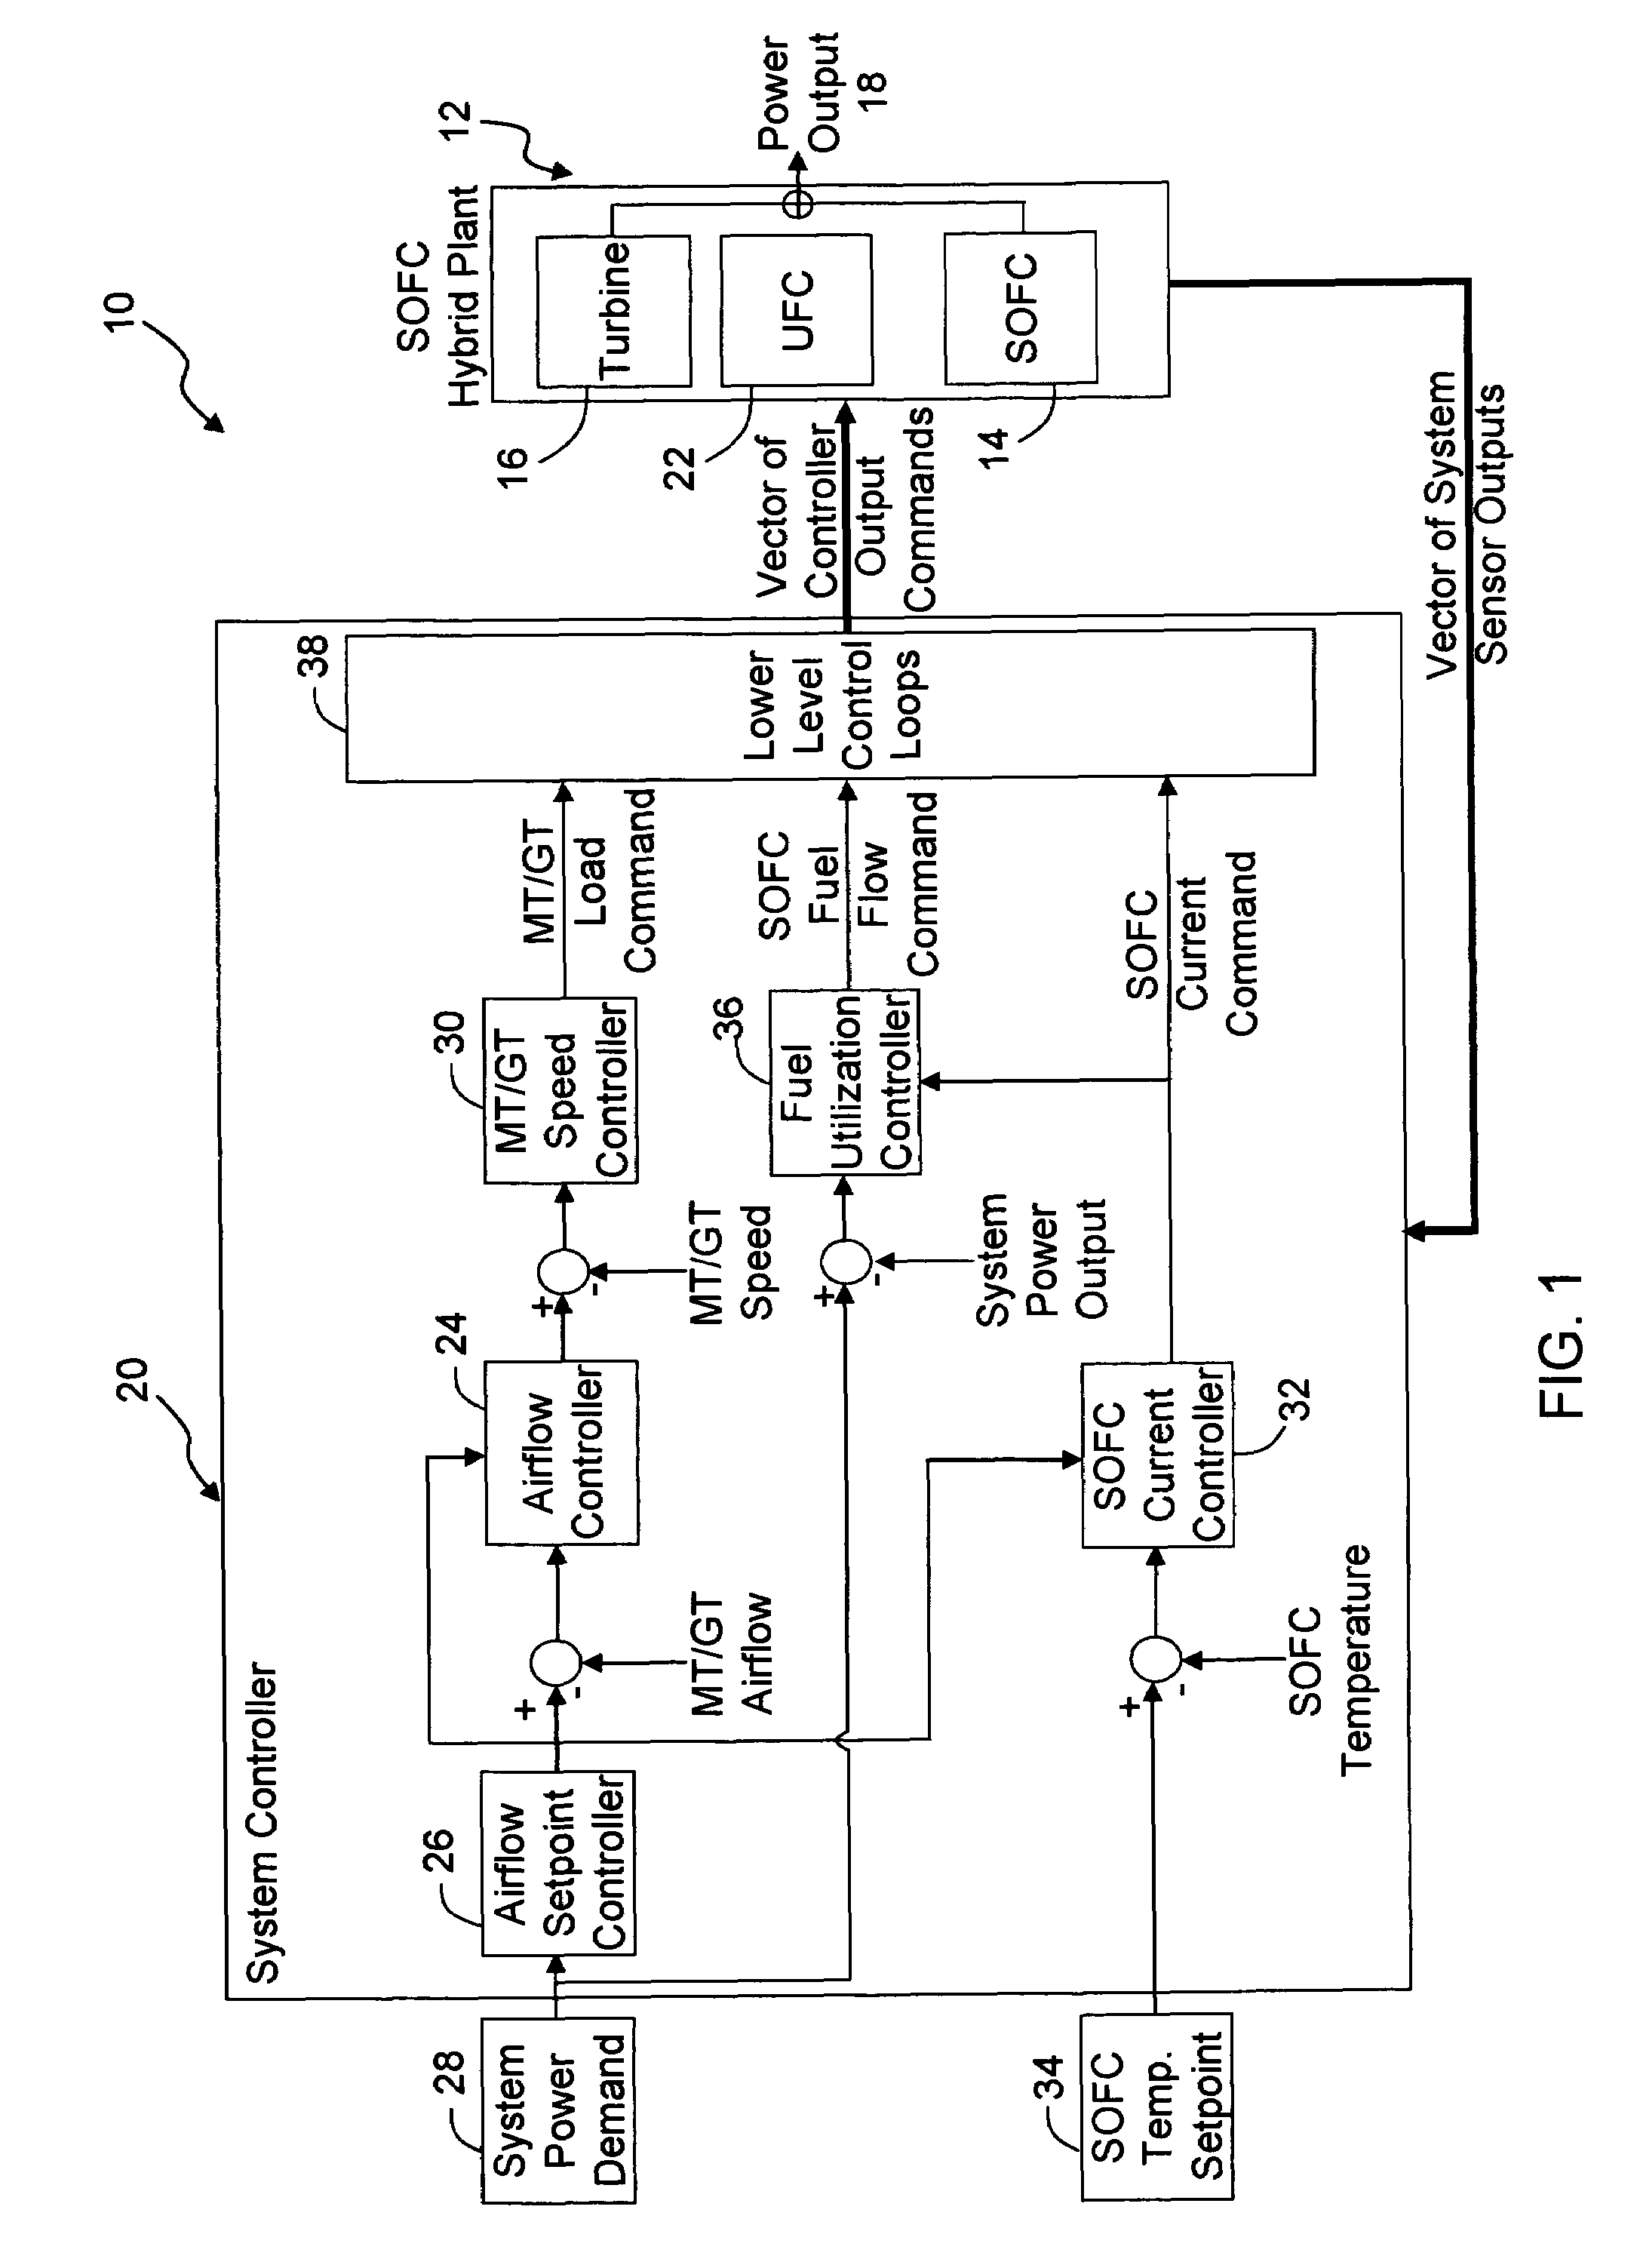 Methods and apparatus for controlled solid oxide fuel cell (SOFC)/turbine hybrid power generation